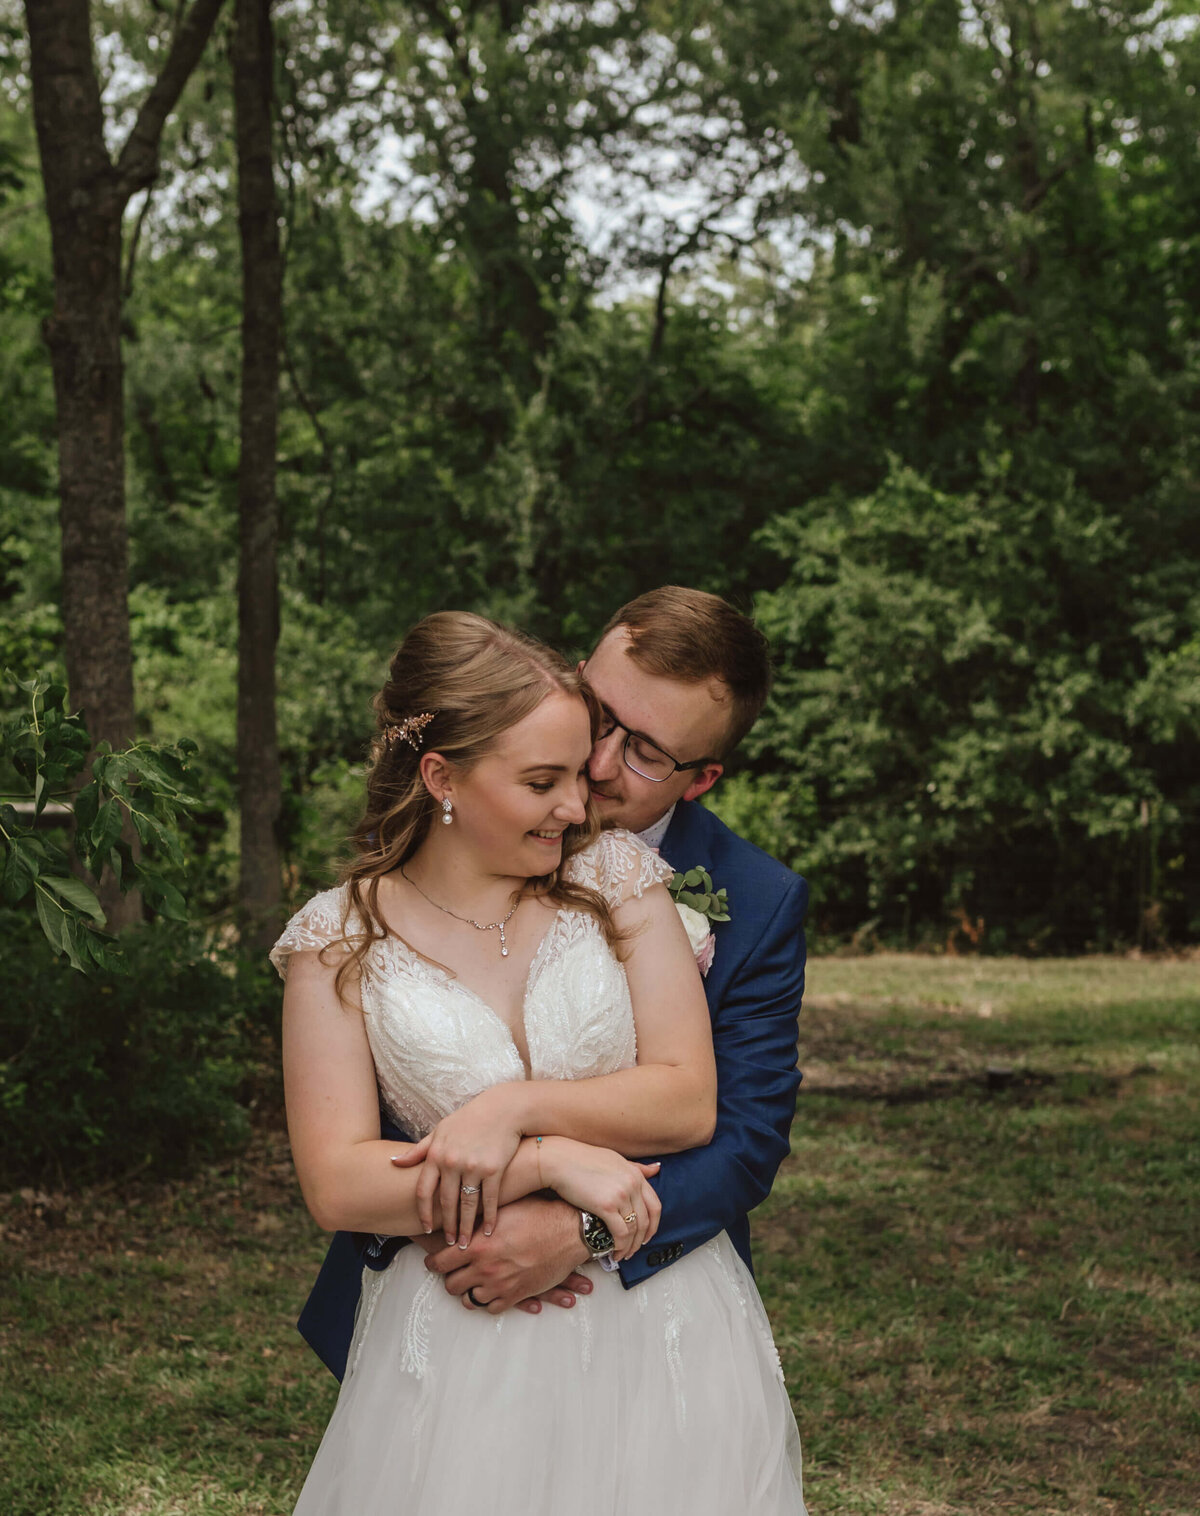 groom hugs bride tightly outside surrounded by greenery after intimate wedding ceremony